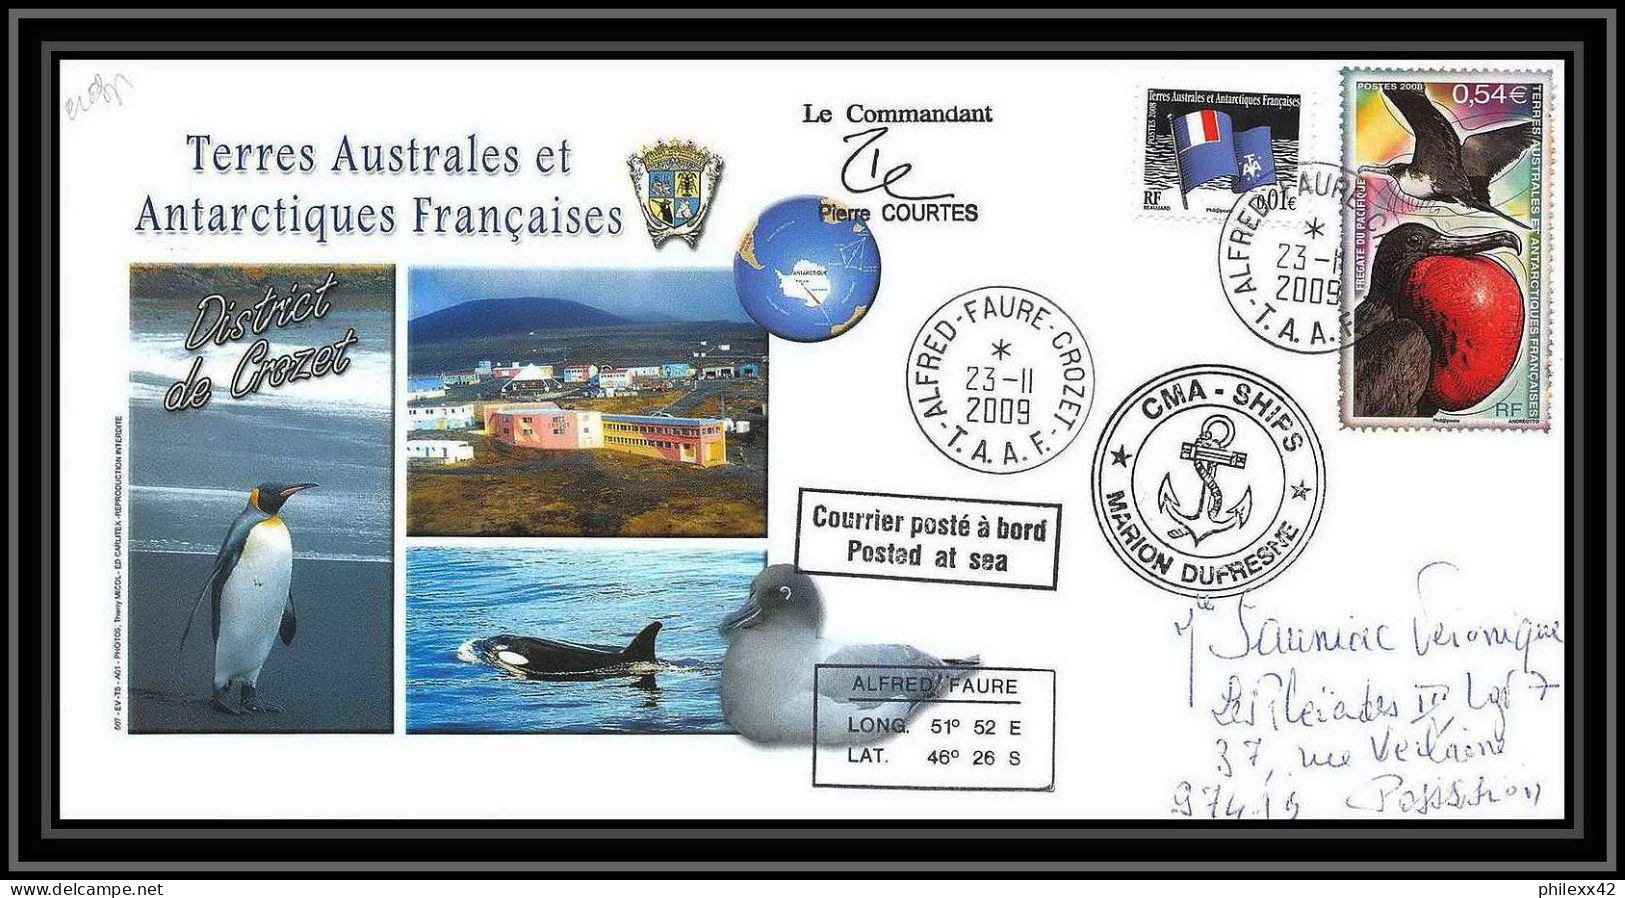 2951 ANTARCTIC Terres Australes TAAF Lettre Dufresne Signé Signed CROZET Portes Ouvertes 23/11/2009 N°517 - Antarctic Expeditions